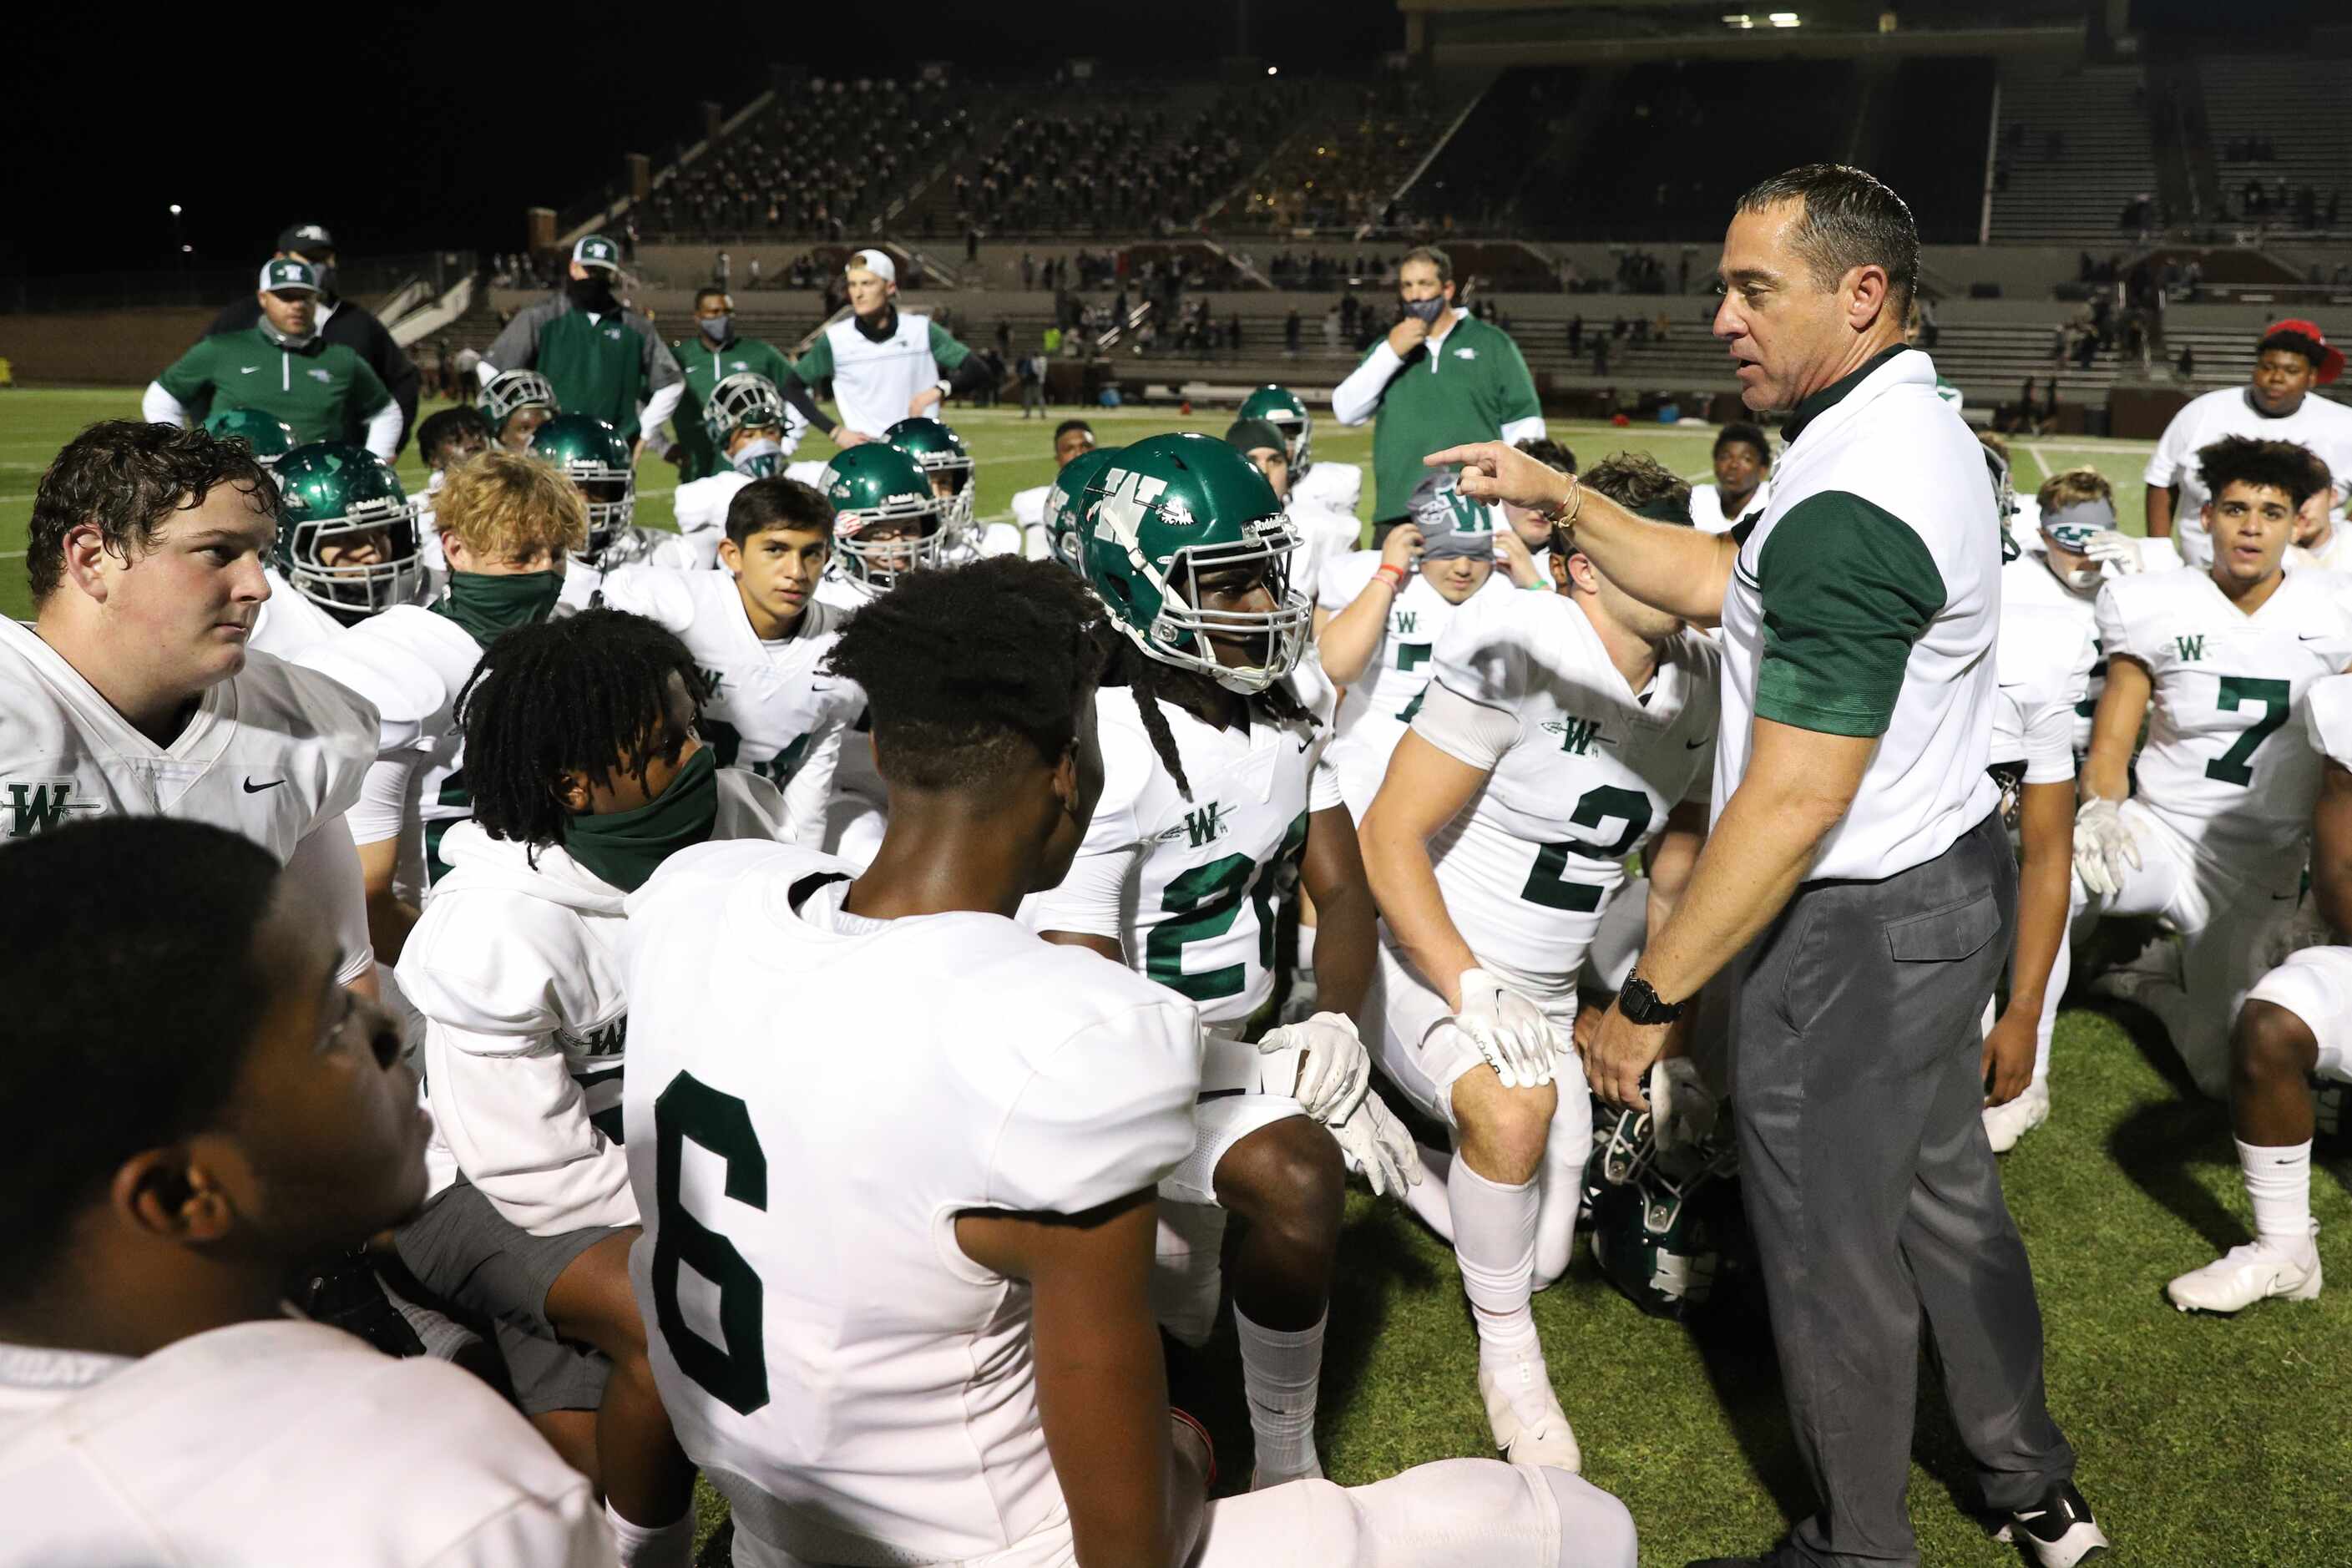 Mansfield head coach Todd Alexander speaks to his team following a win against Mansfield at...